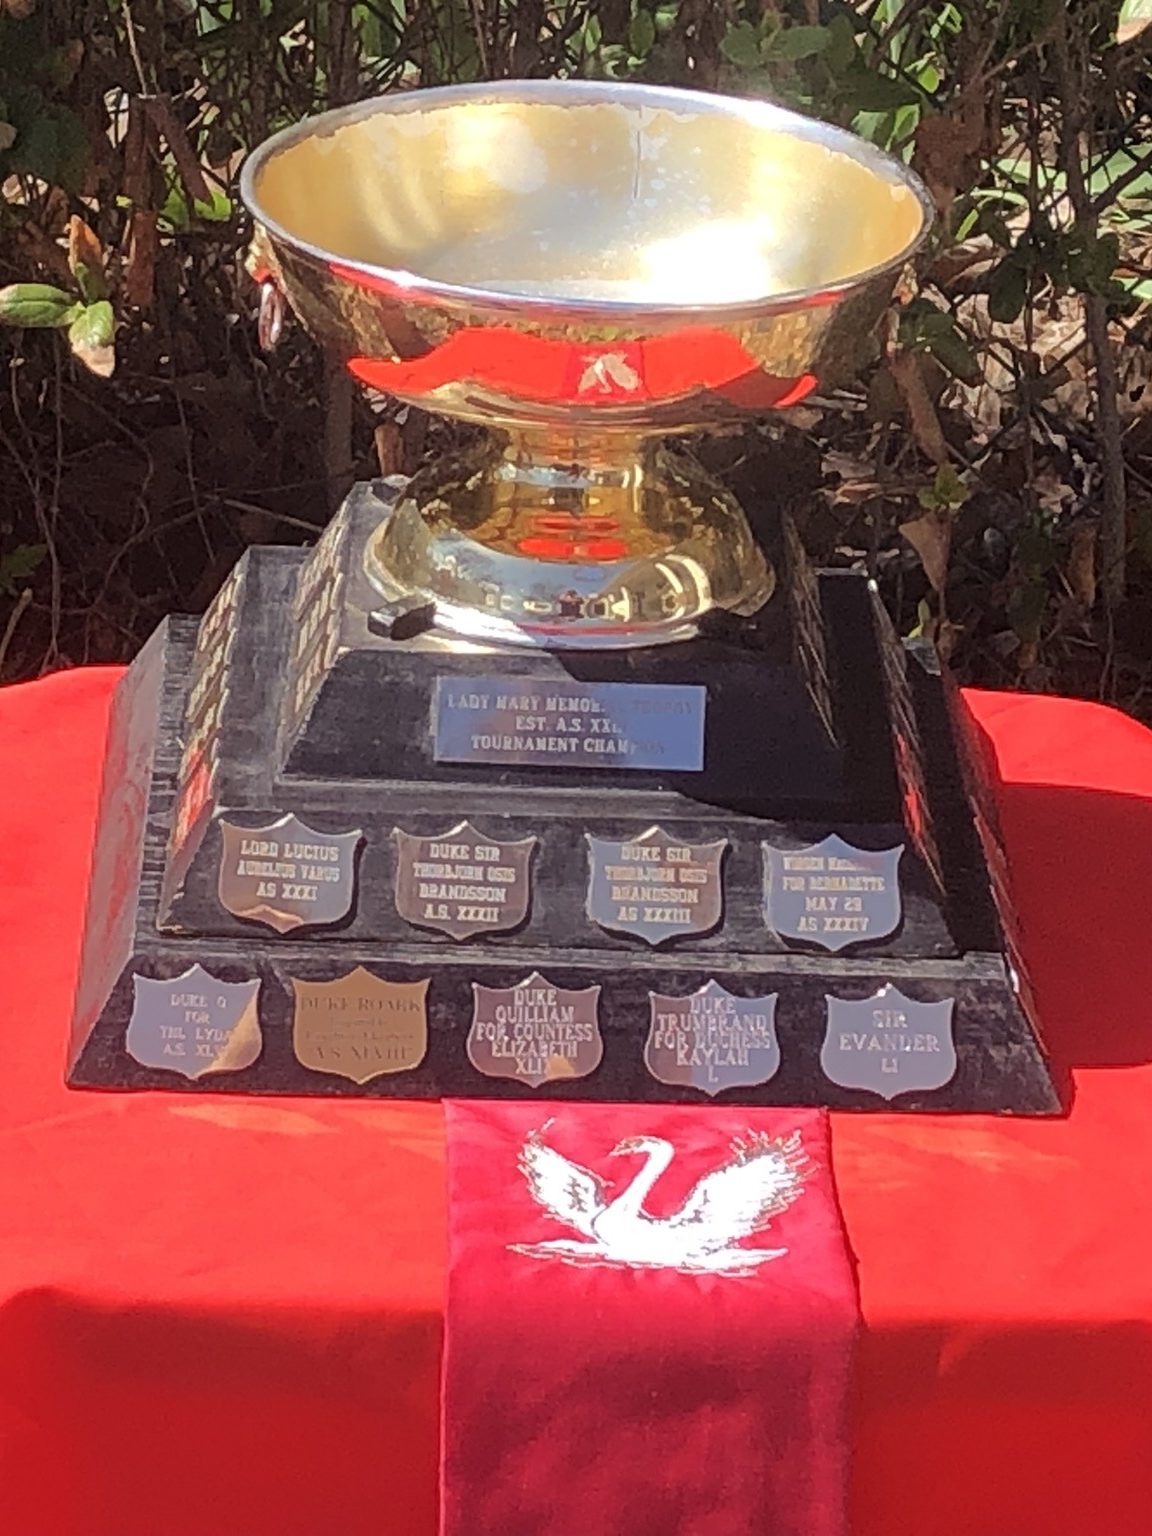 A large trophy on a small table with a red talecloth